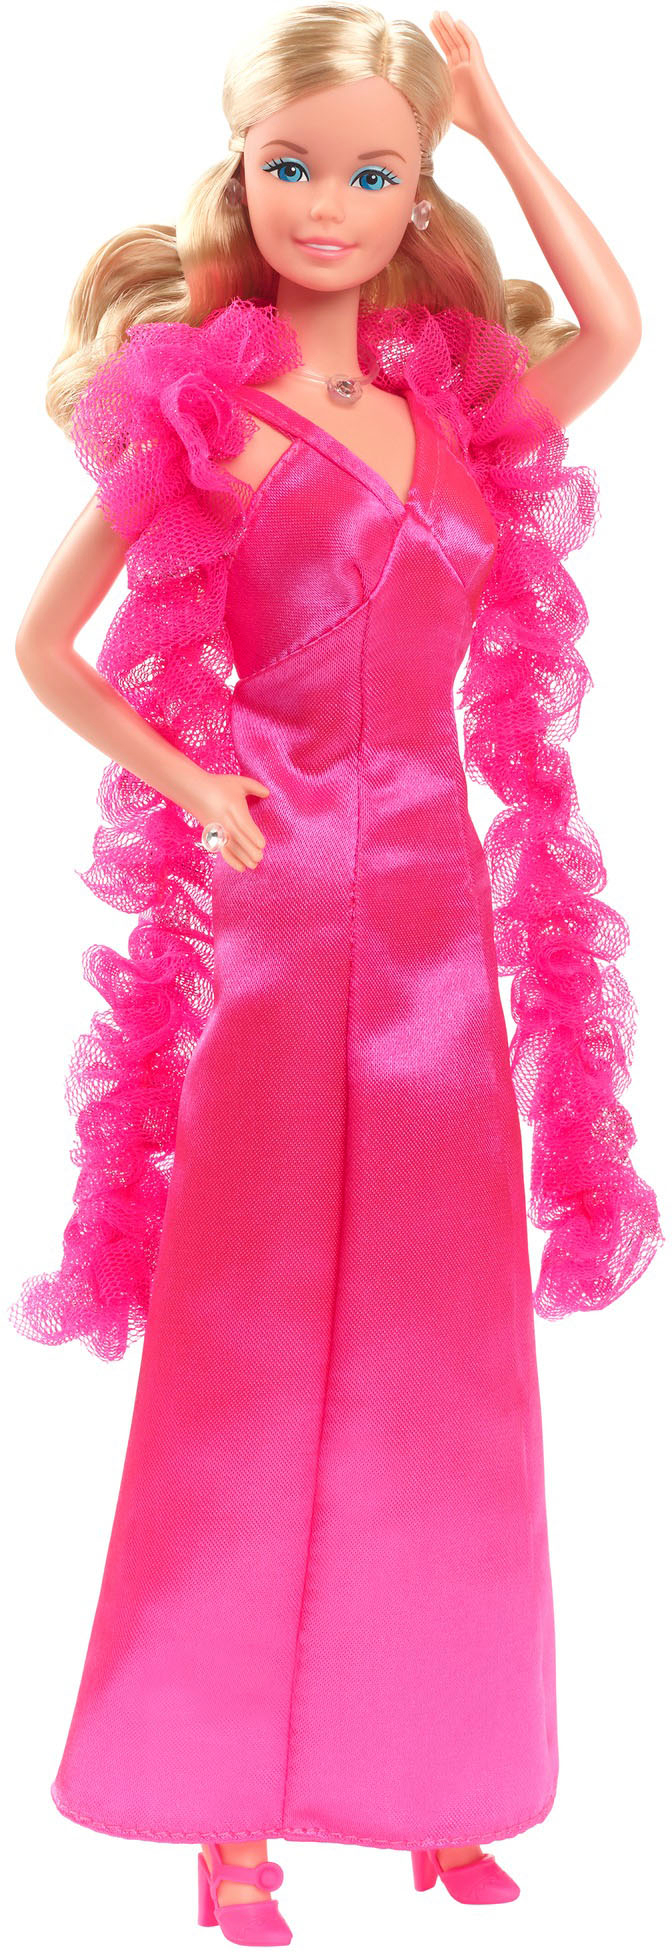 Barbie Signature 1977 SuperStar Doll HBY11 - Best Buy